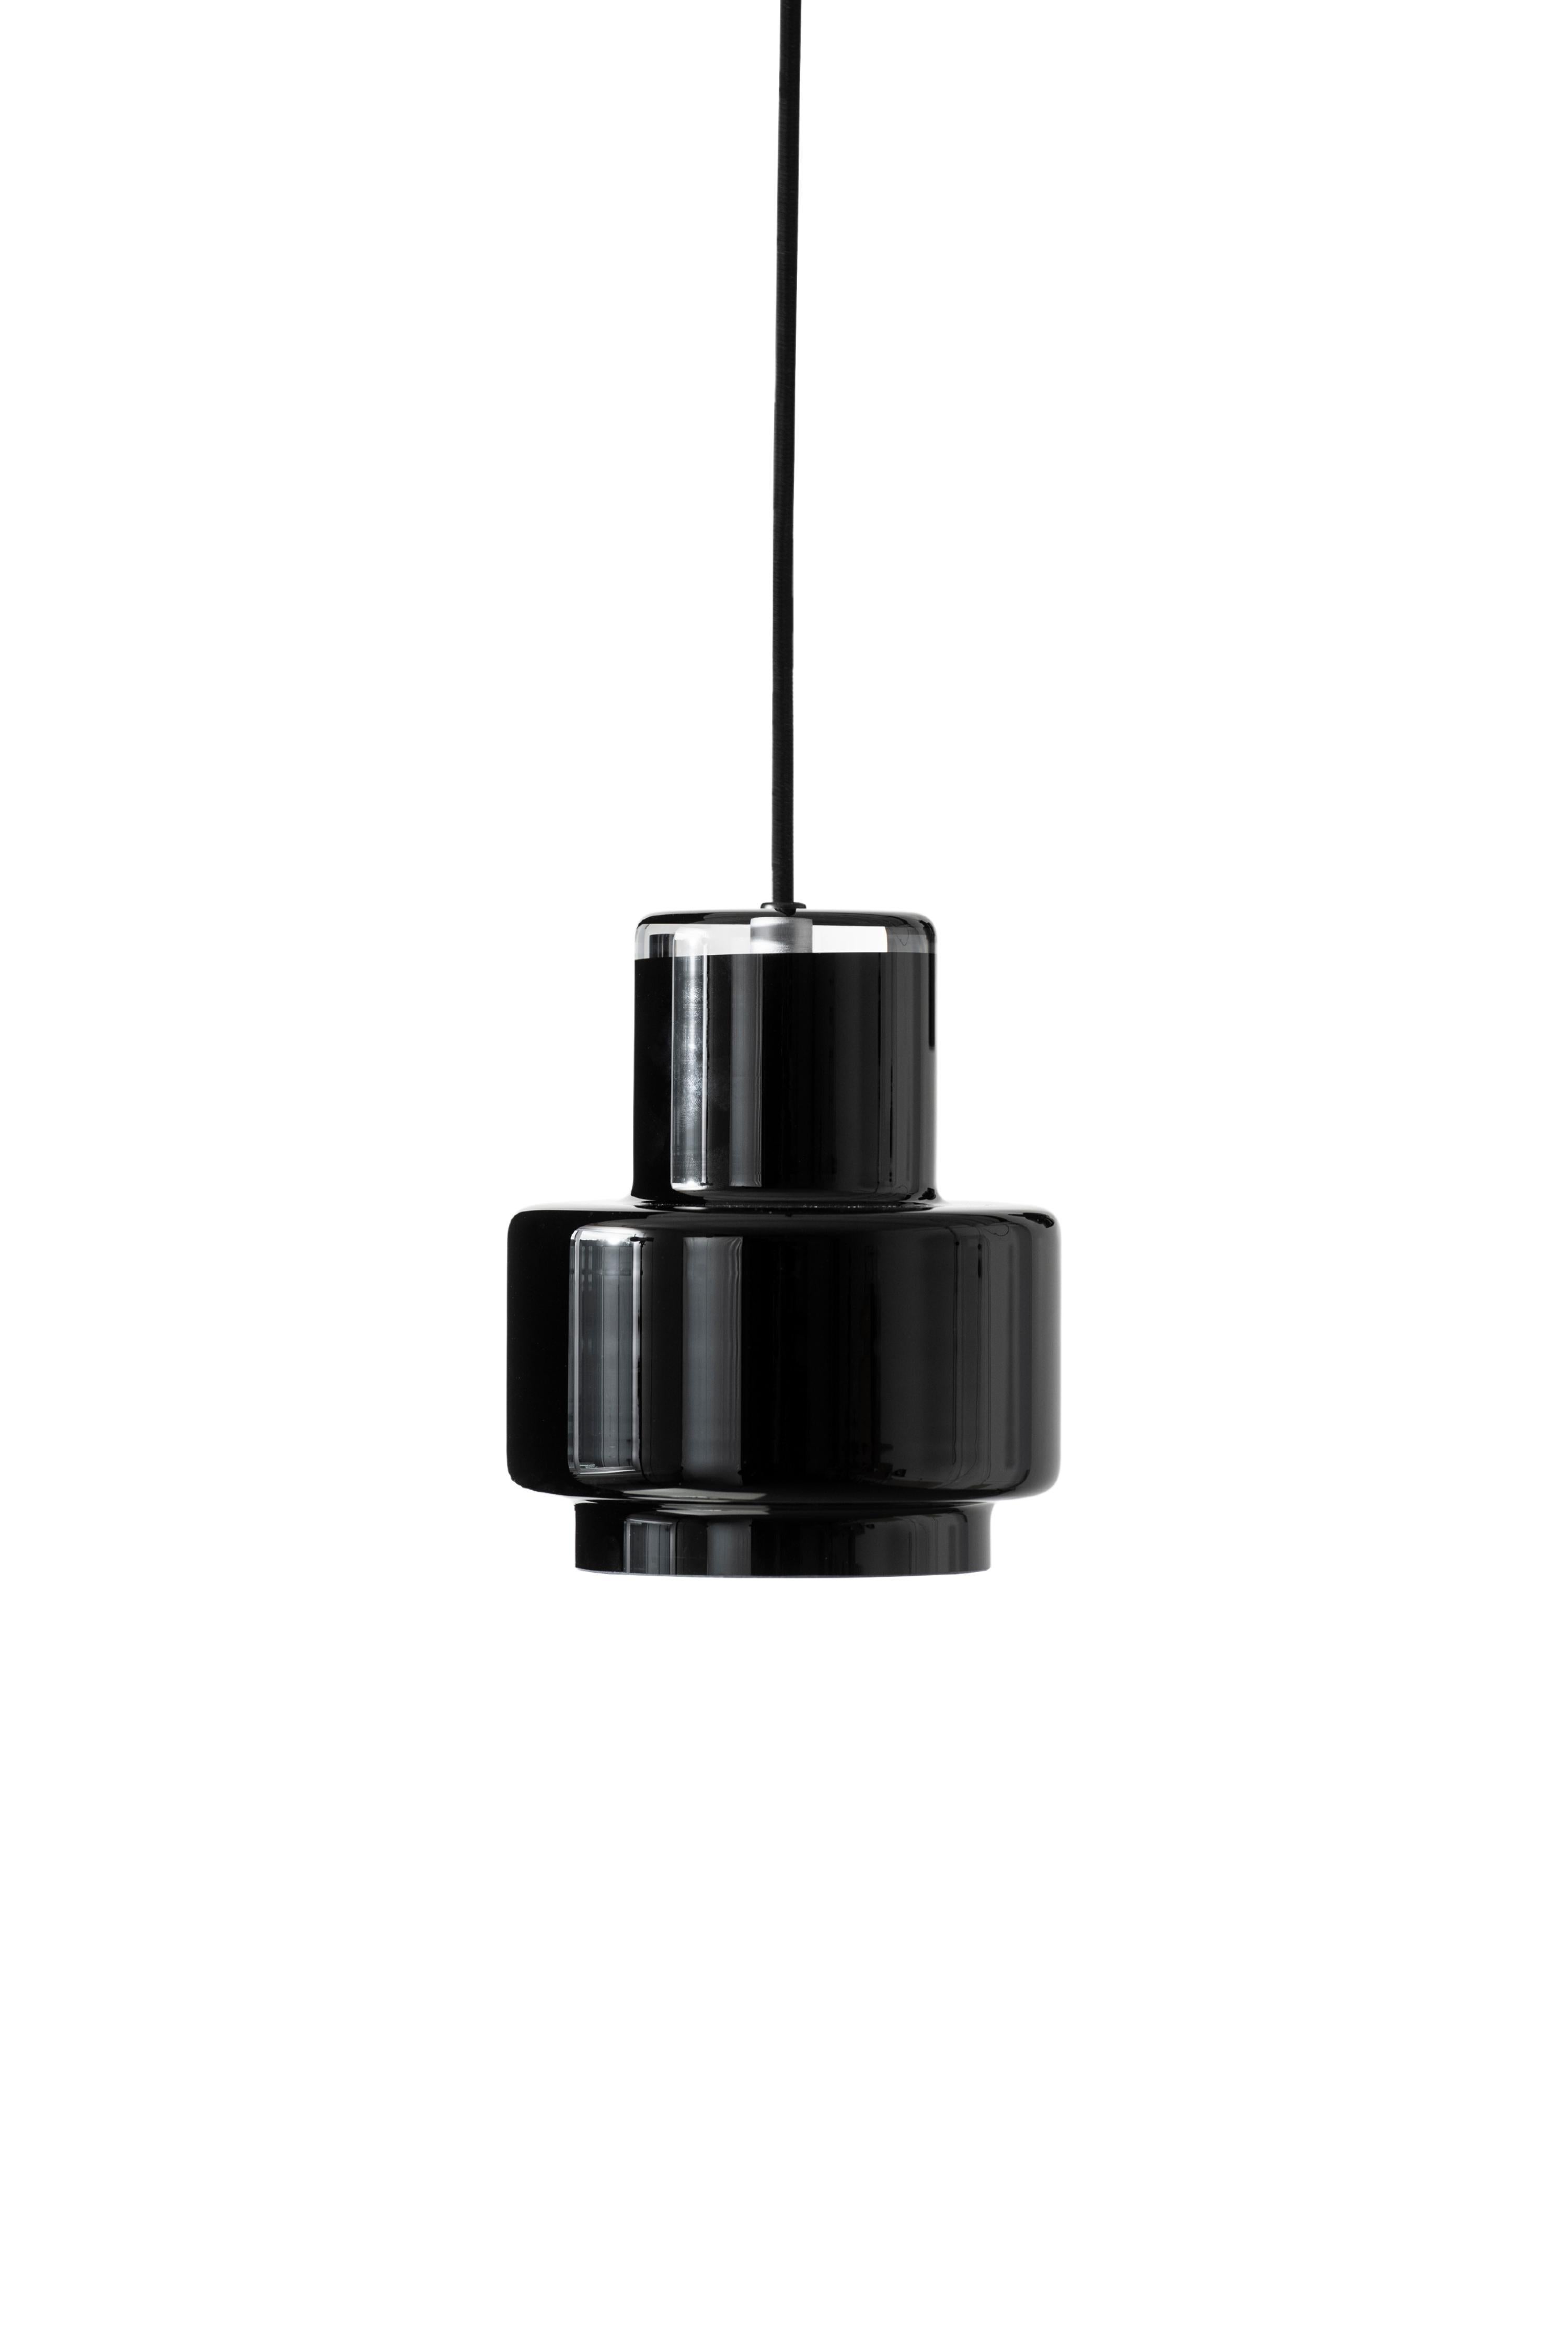 Pair of 'Multi M' Glass Pendants in Black by Jokinen and Konu for Innolux In New Condition For Sale In Glendale, CA